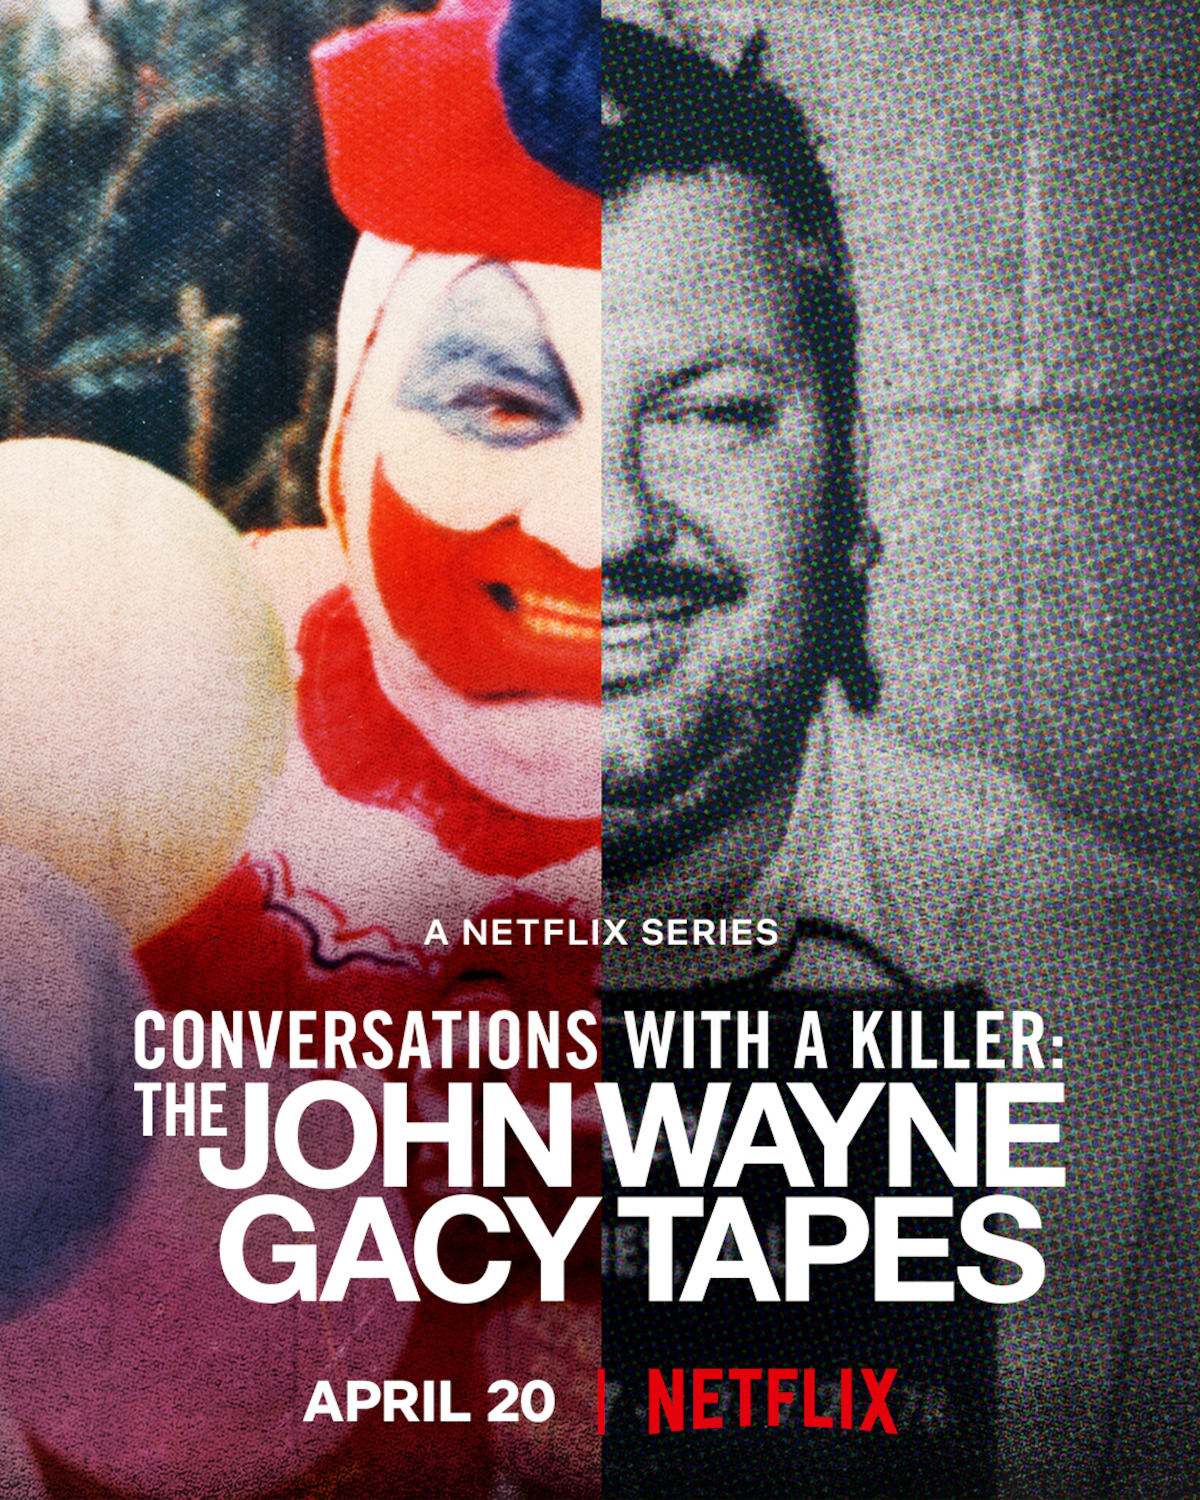 The Horrors of John Wayne Gacy Lurk in New ‘Conversations with a Killer’ Trailer